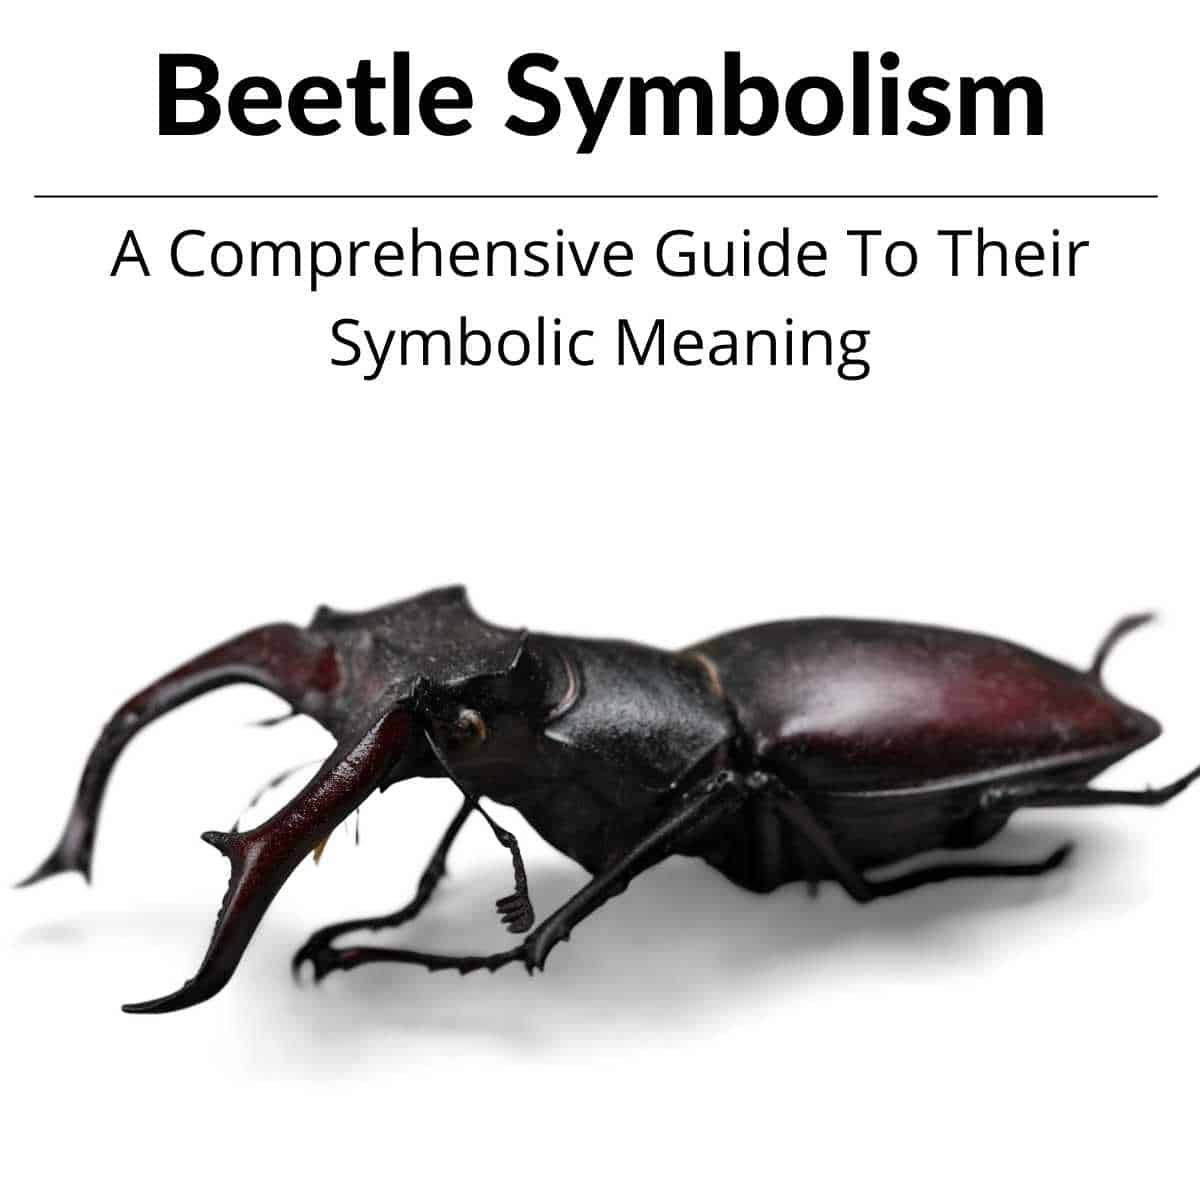 Beetle Symbolism - A Comprehensive Guide To Their Symbolic Meaning